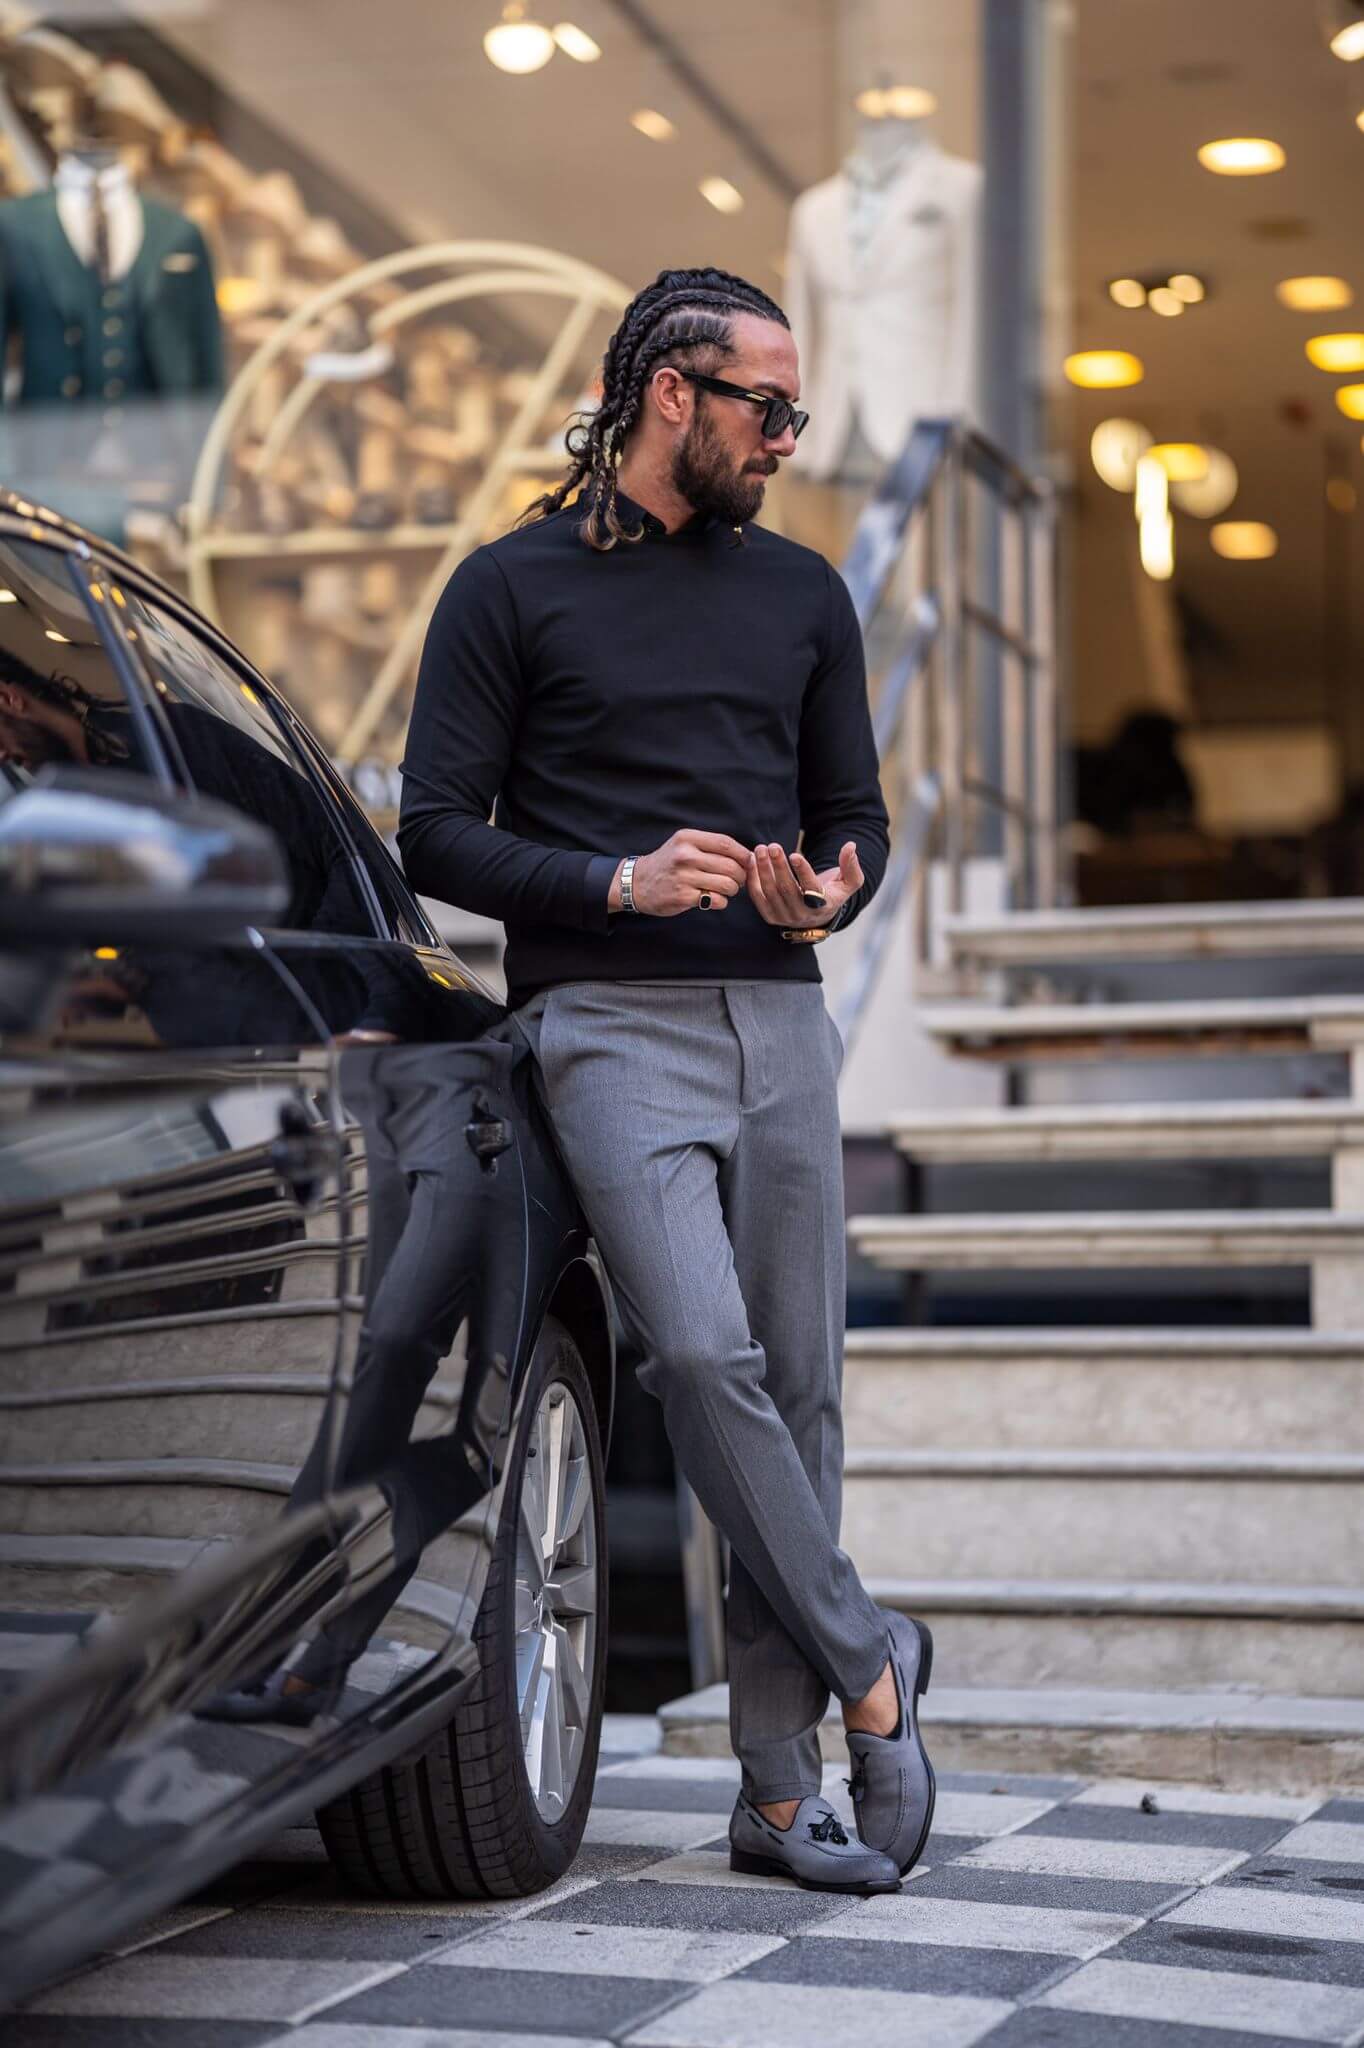 Casually chic: Our male model effortlessly rocks a black crewneck, epitomizing laid-back elegance.